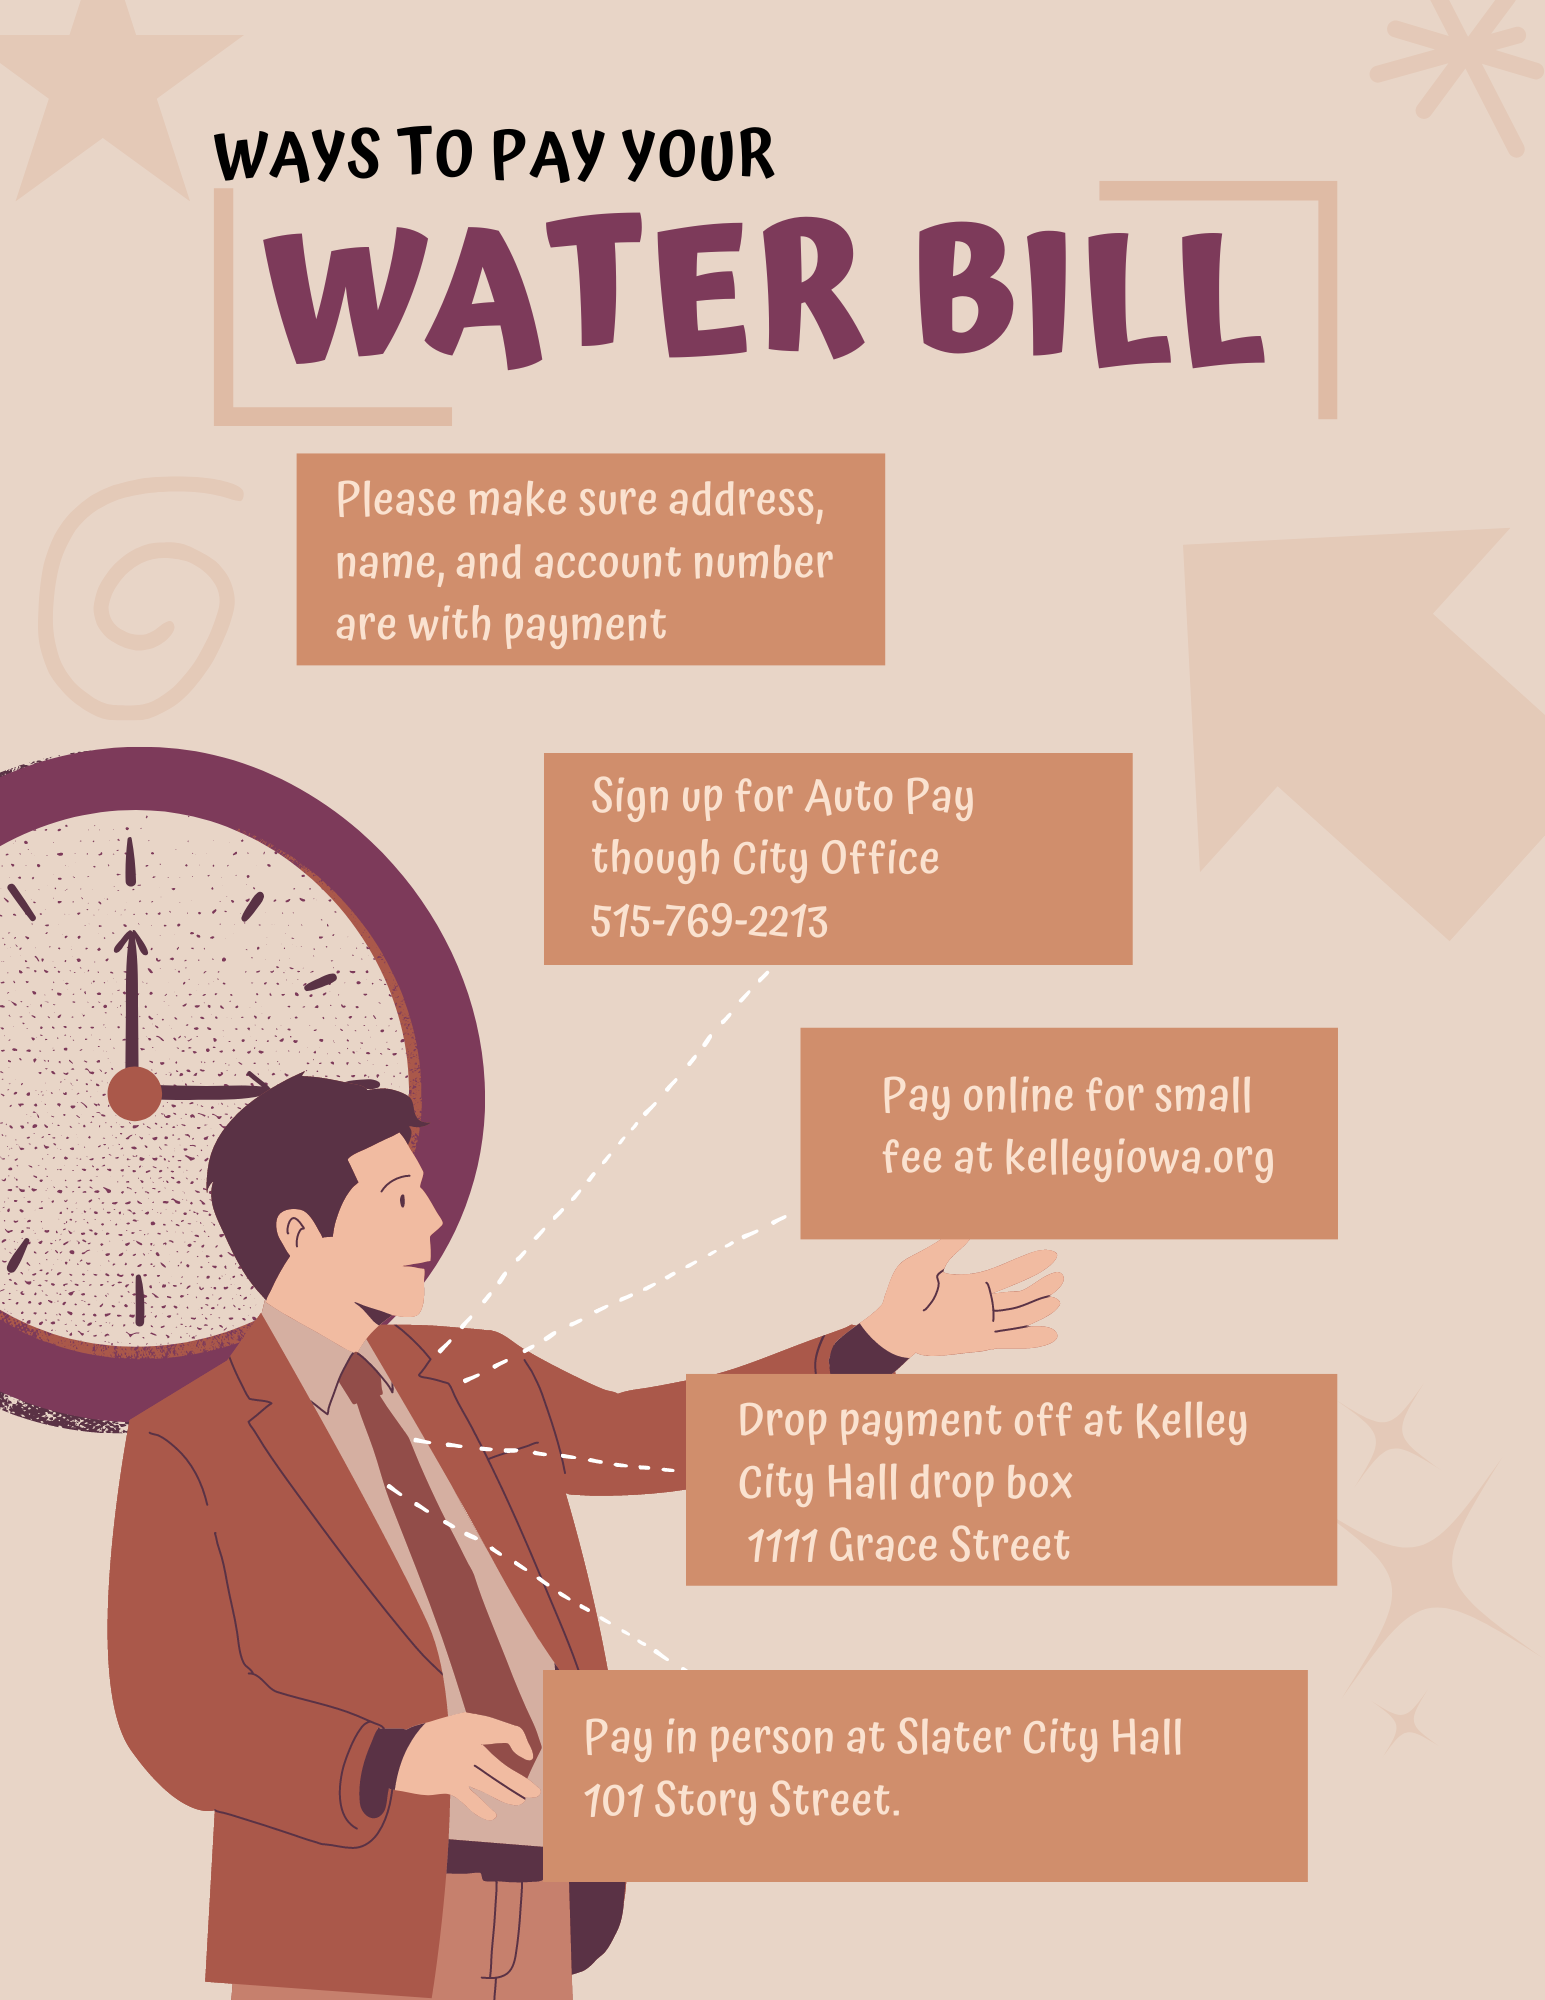 Ways to pay water bill